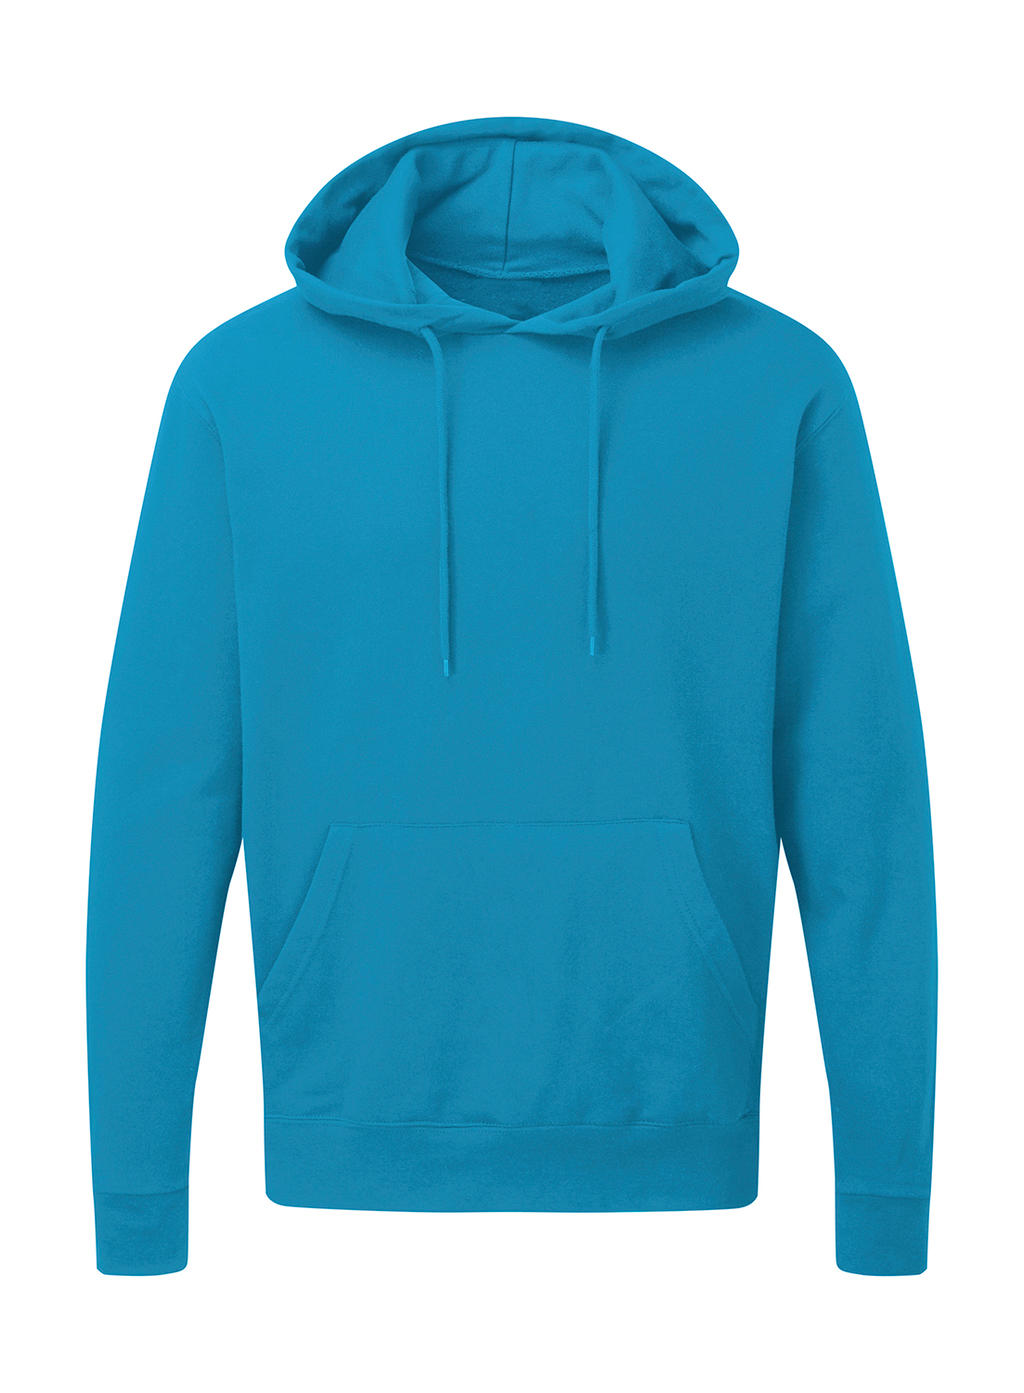  Mens Hooded Sweatshirt in Farbe Turquoise